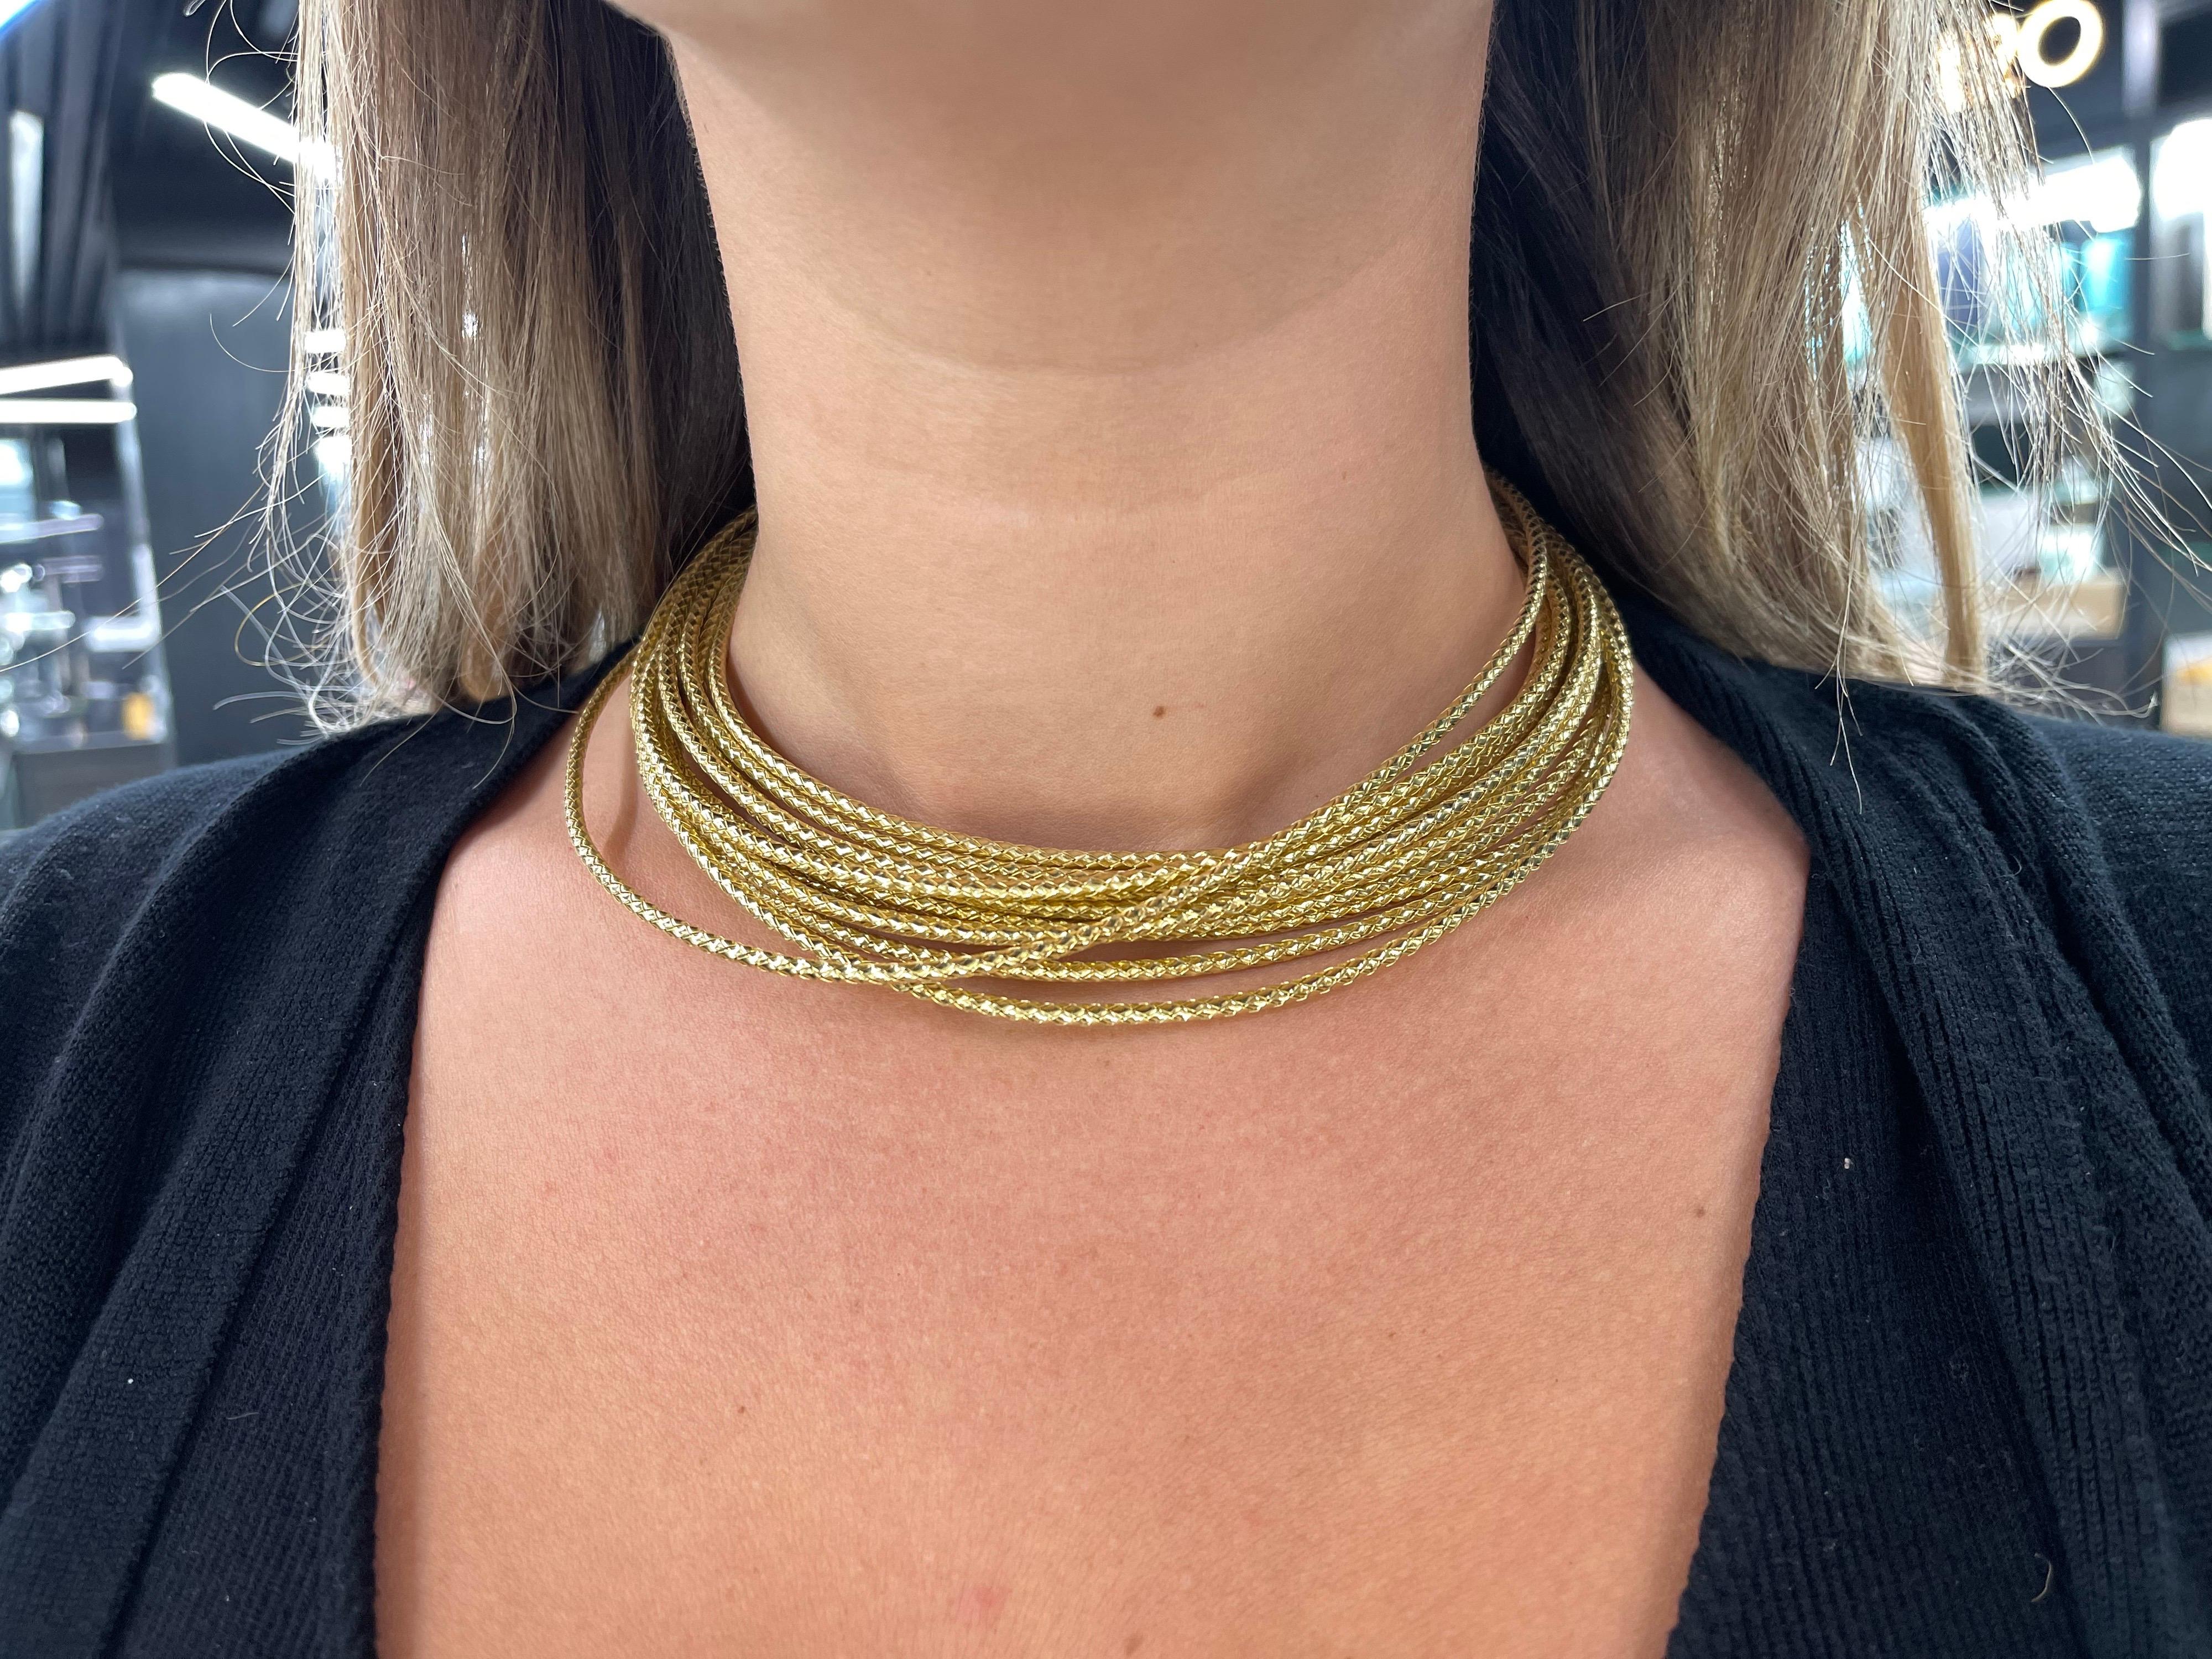 18 Karat Yellow gold necklace 13 multi textured rope weighing 161.3 grams. Stamped 750 ROMA
Very Comfortable On The Neck. 
Matching Bracelet In Stock.
